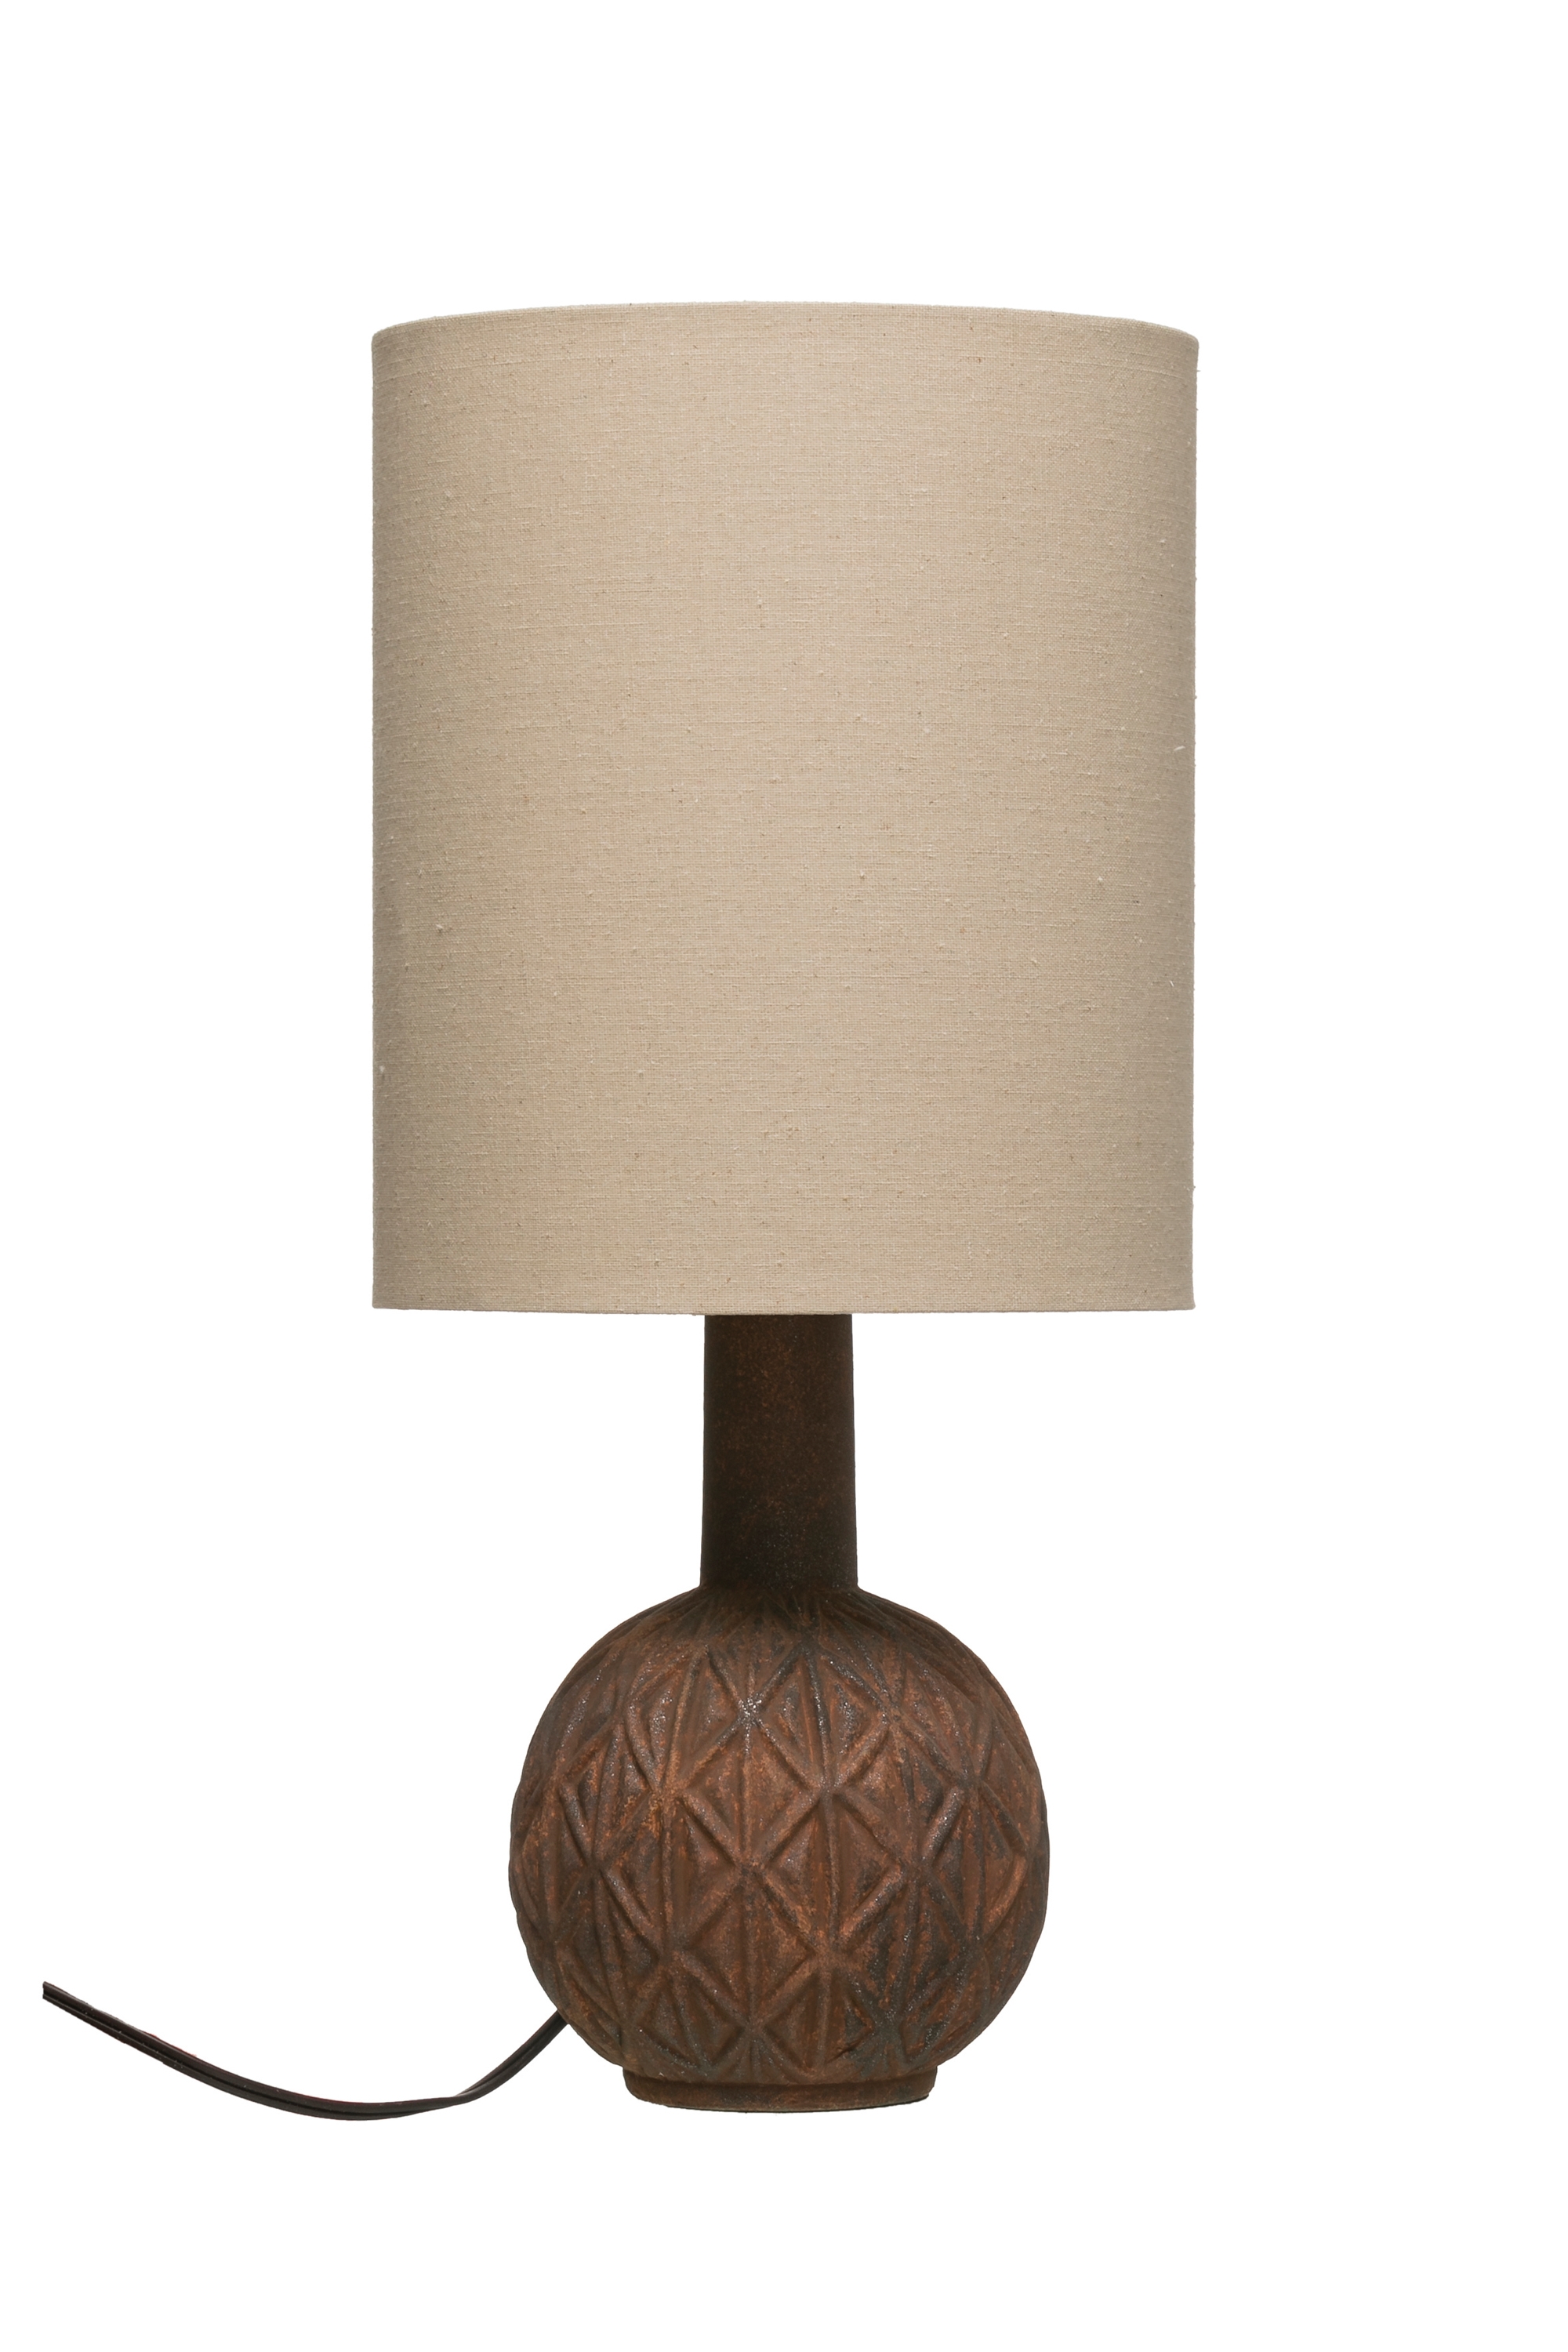 Embossed Terracotta Table Lamp with Linen Shade - Image 0